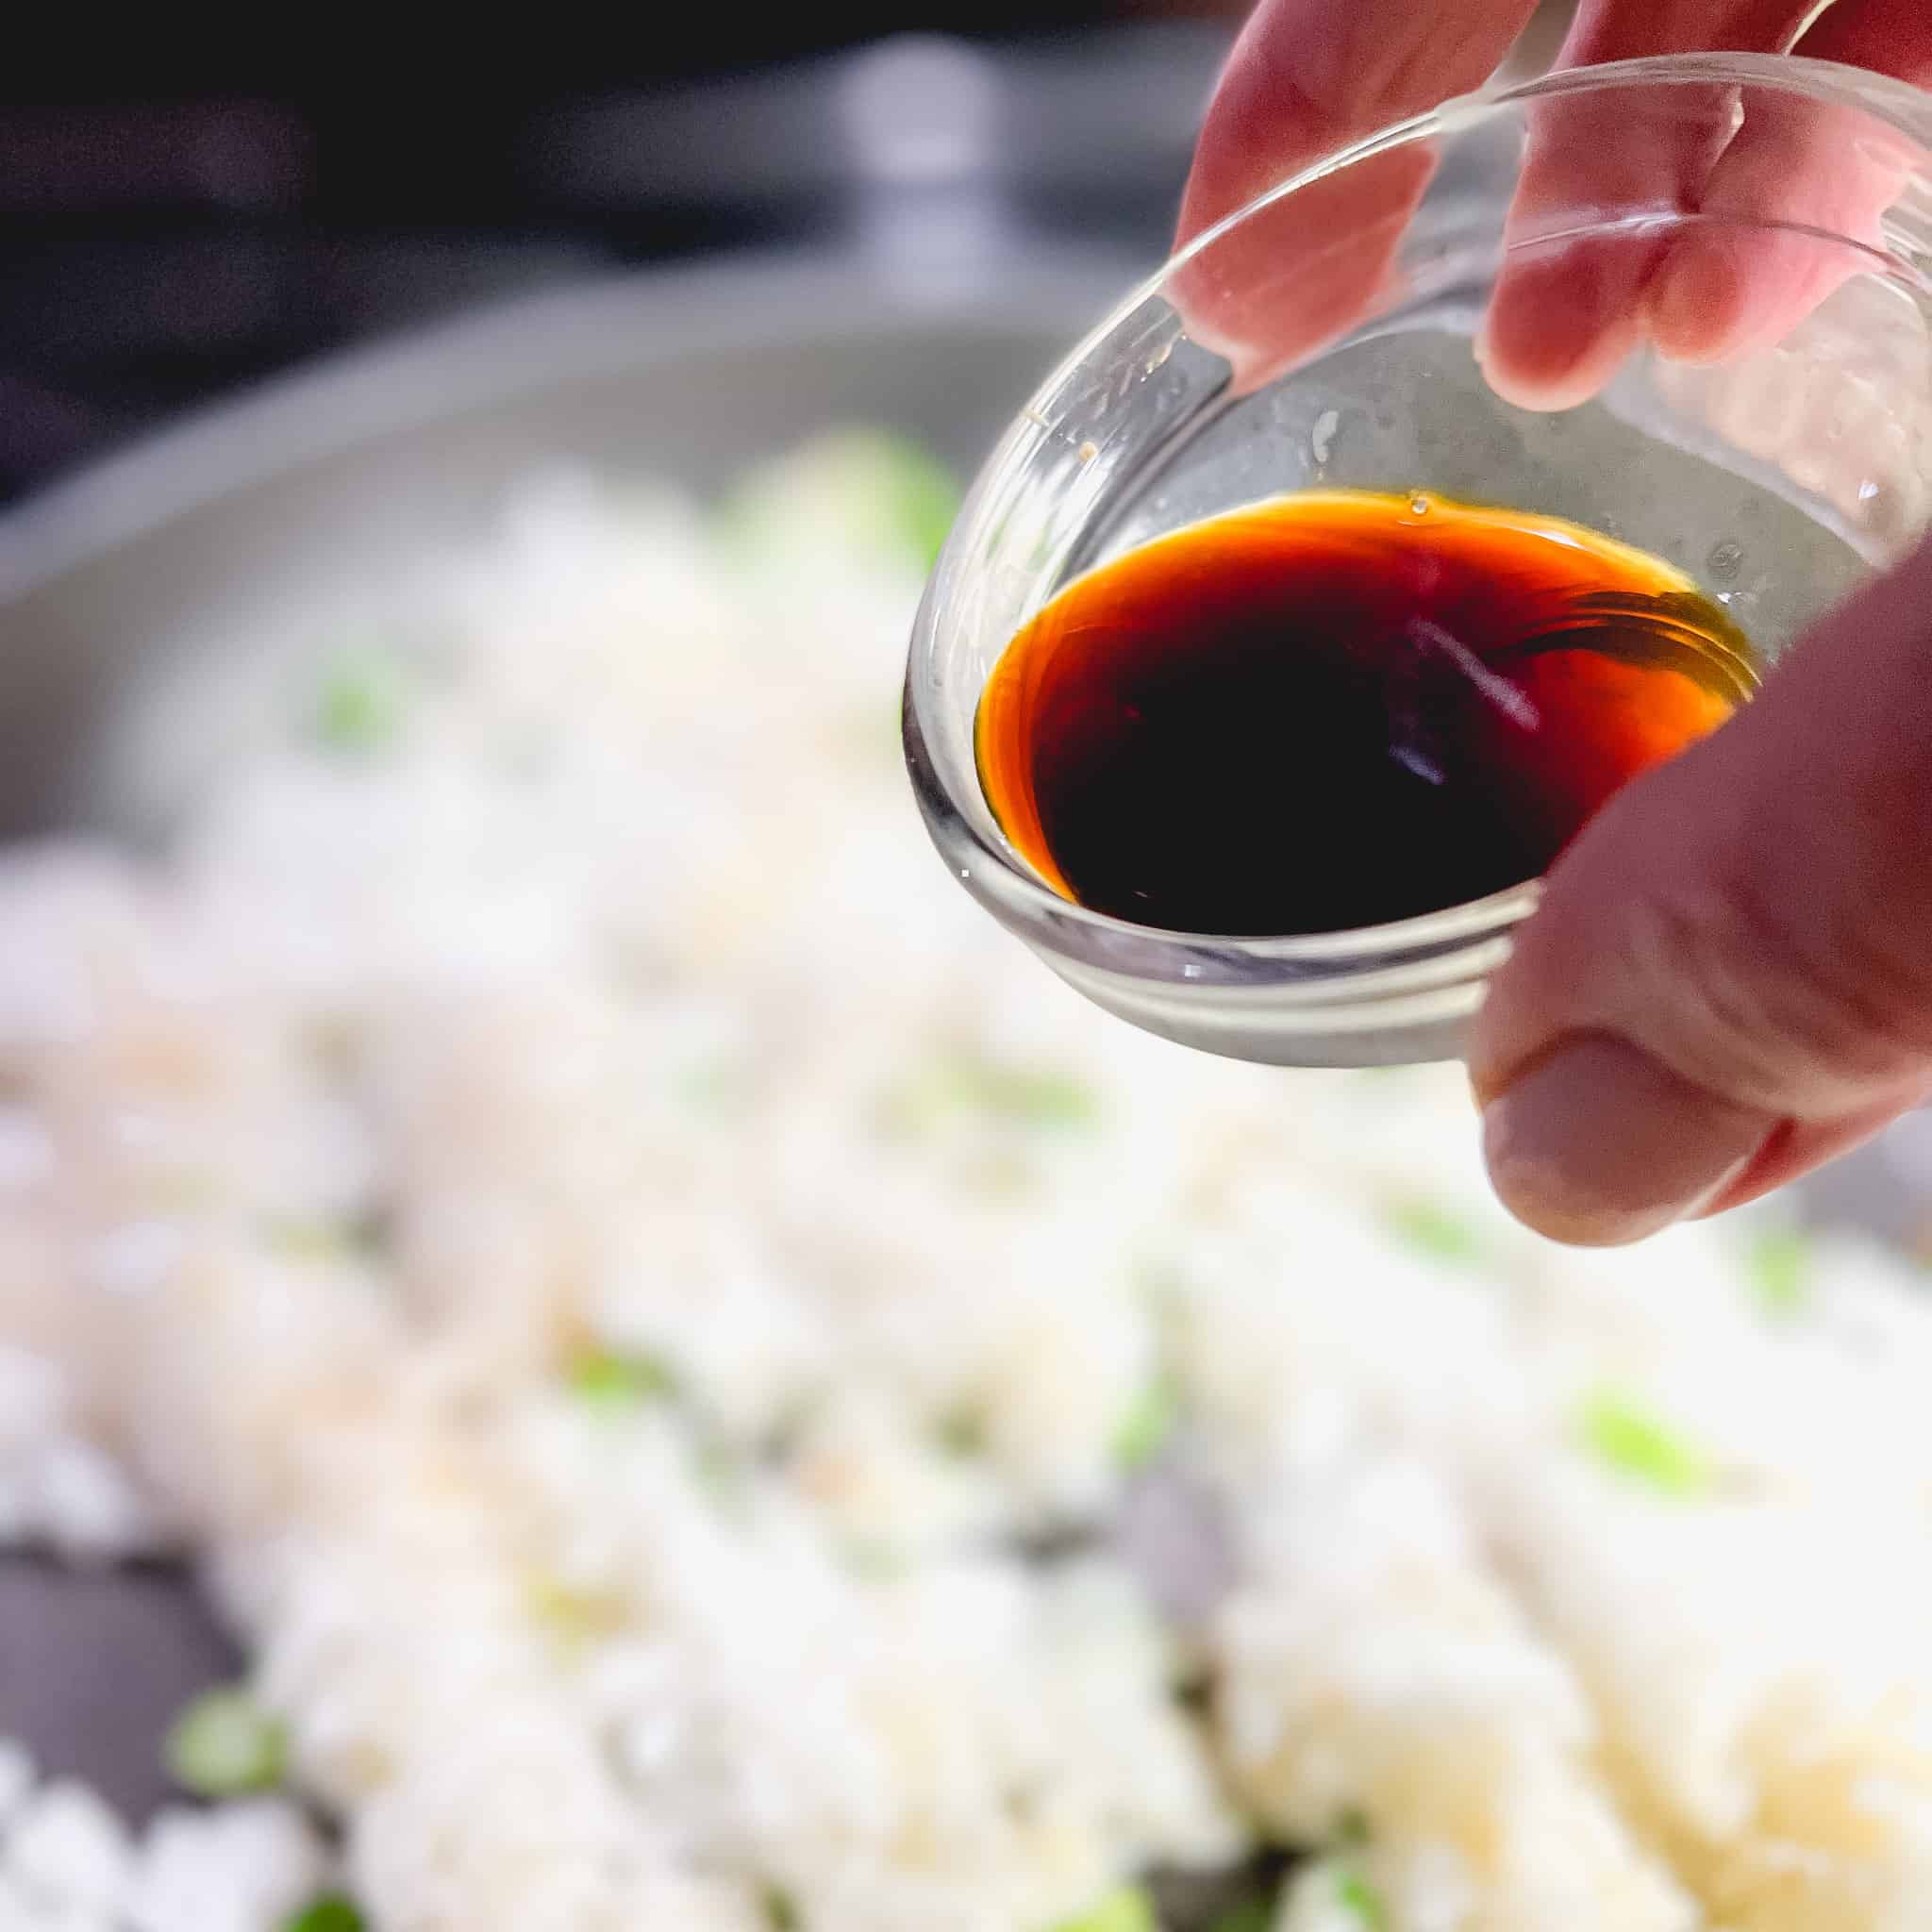 Adding soy sauce to white rice.